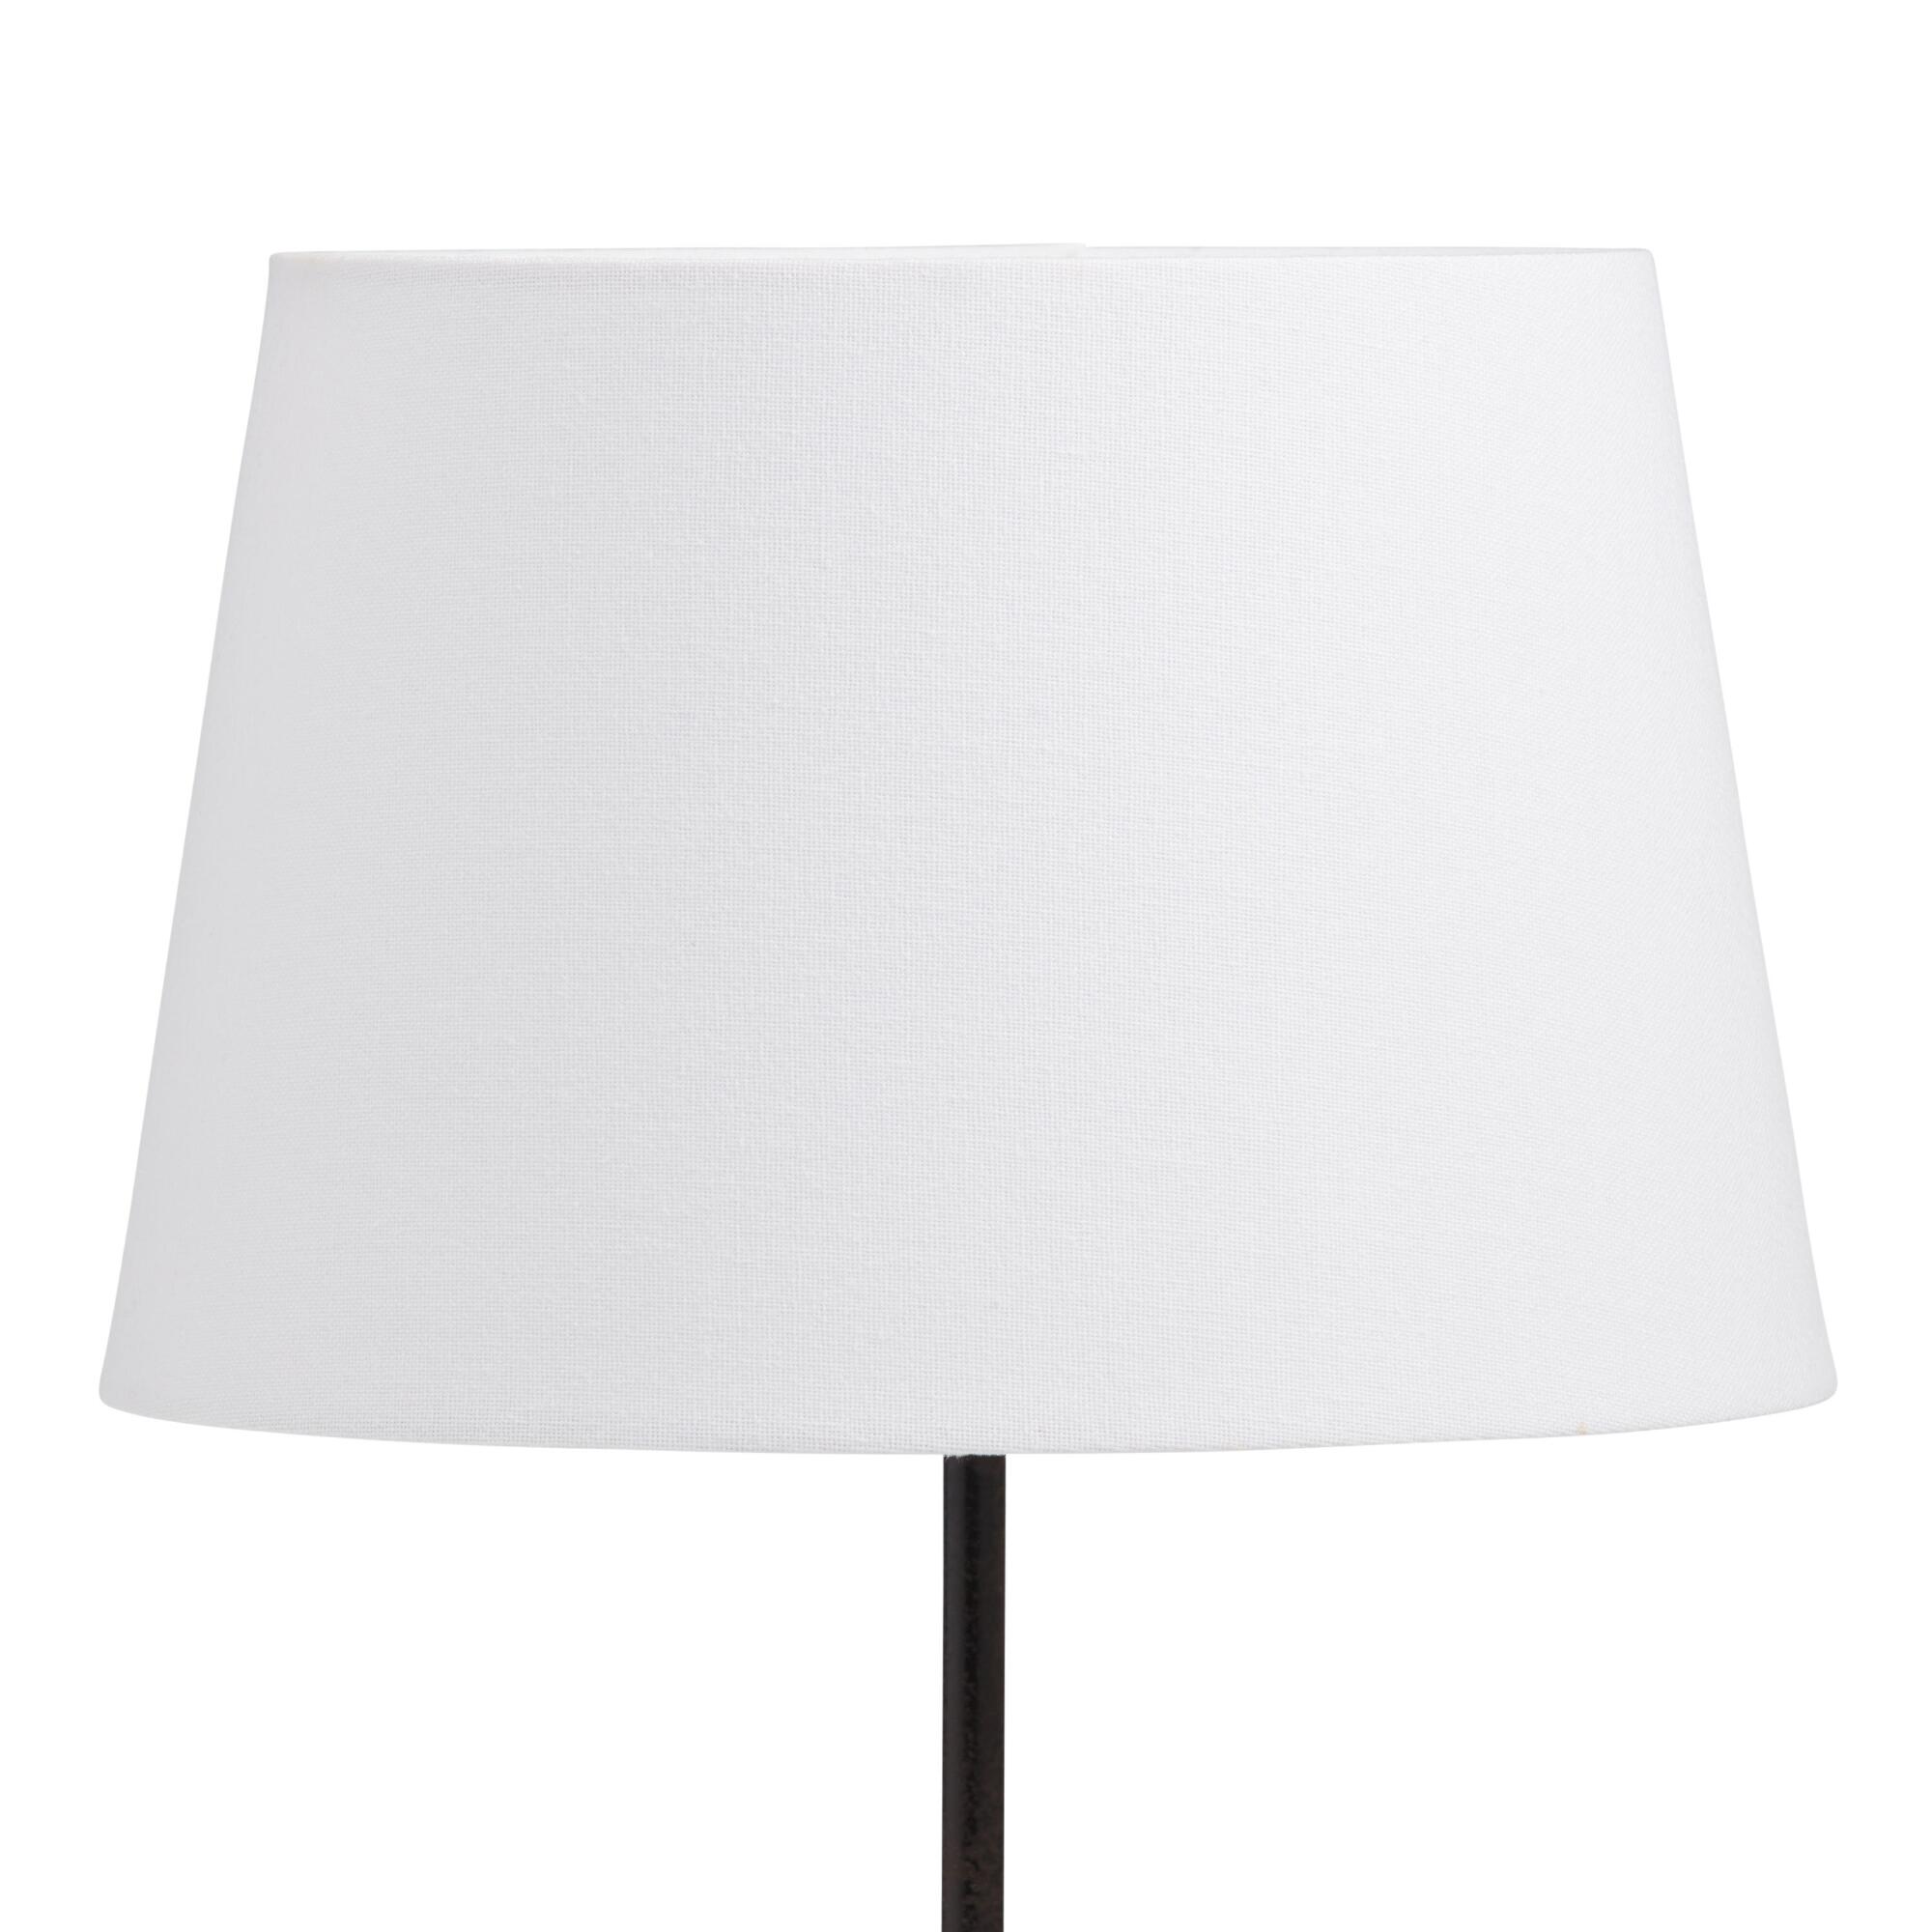 White Cotton Linen Accent Lamp Shade - Small by World Market